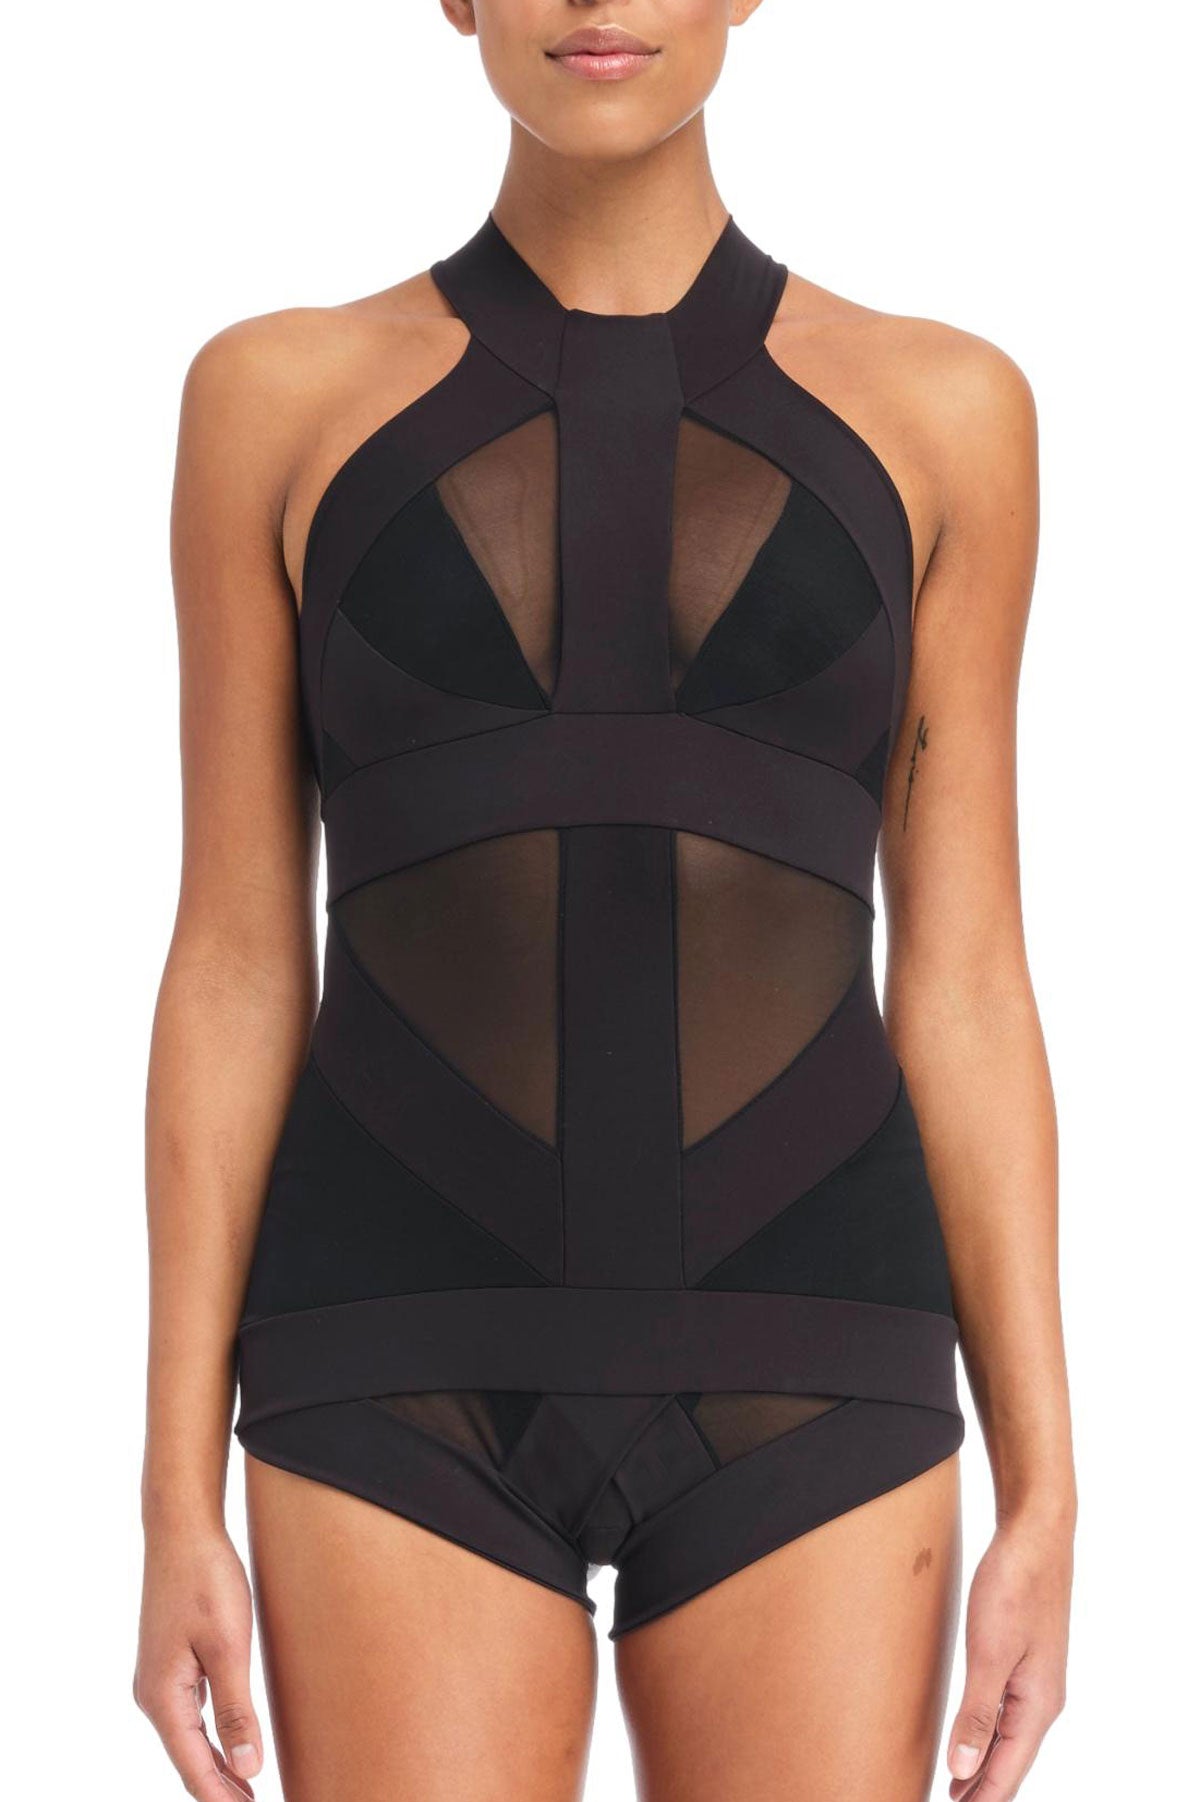 Don't Shoot the Messengers Artemis ouvert suspender body in Black